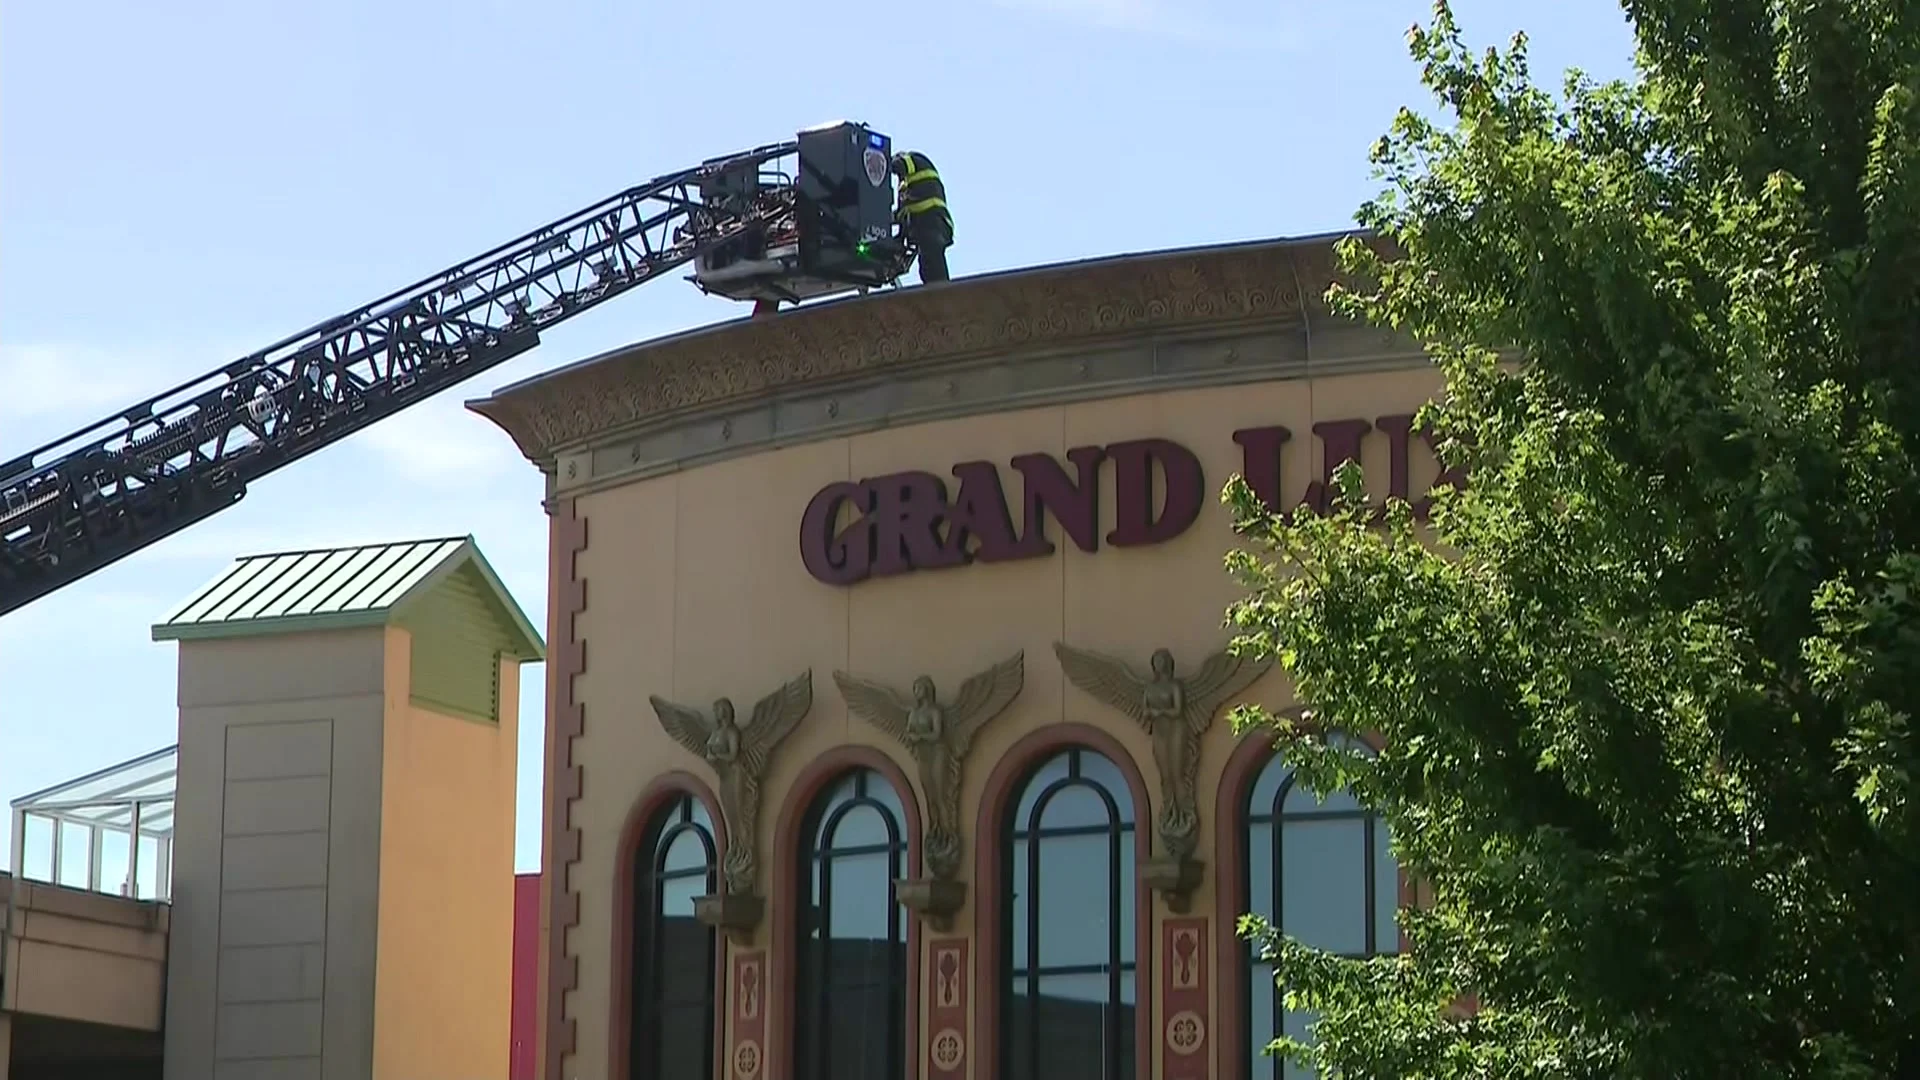 Officials: 1 employee injured after fire breaks out in kitchen at Grand Lux Café